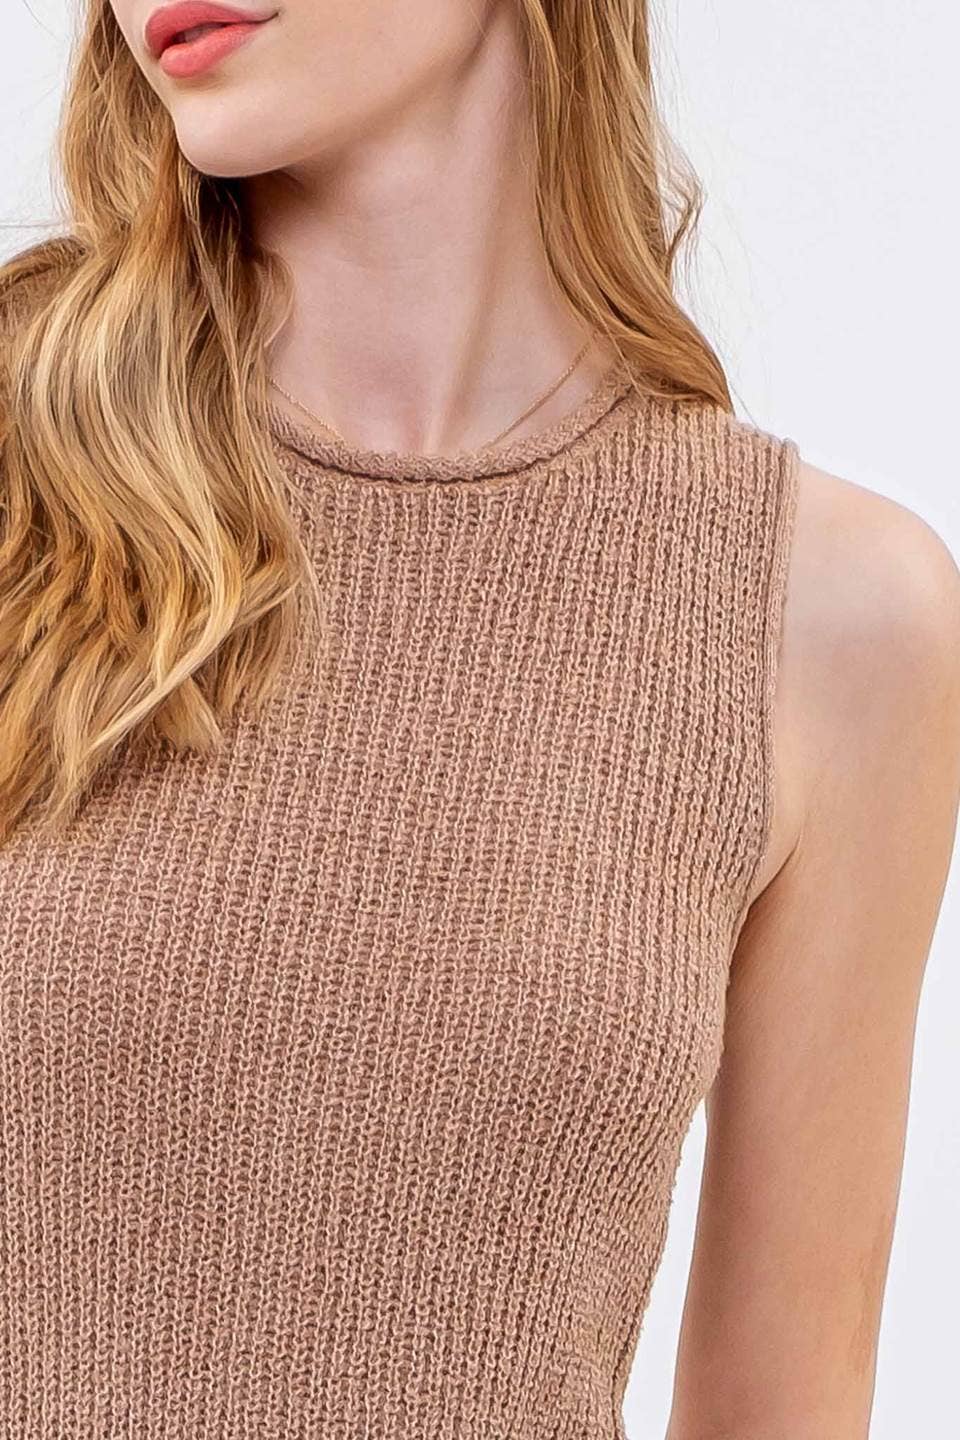 Braided Babe CROCHET SWEATER KNIT TOP